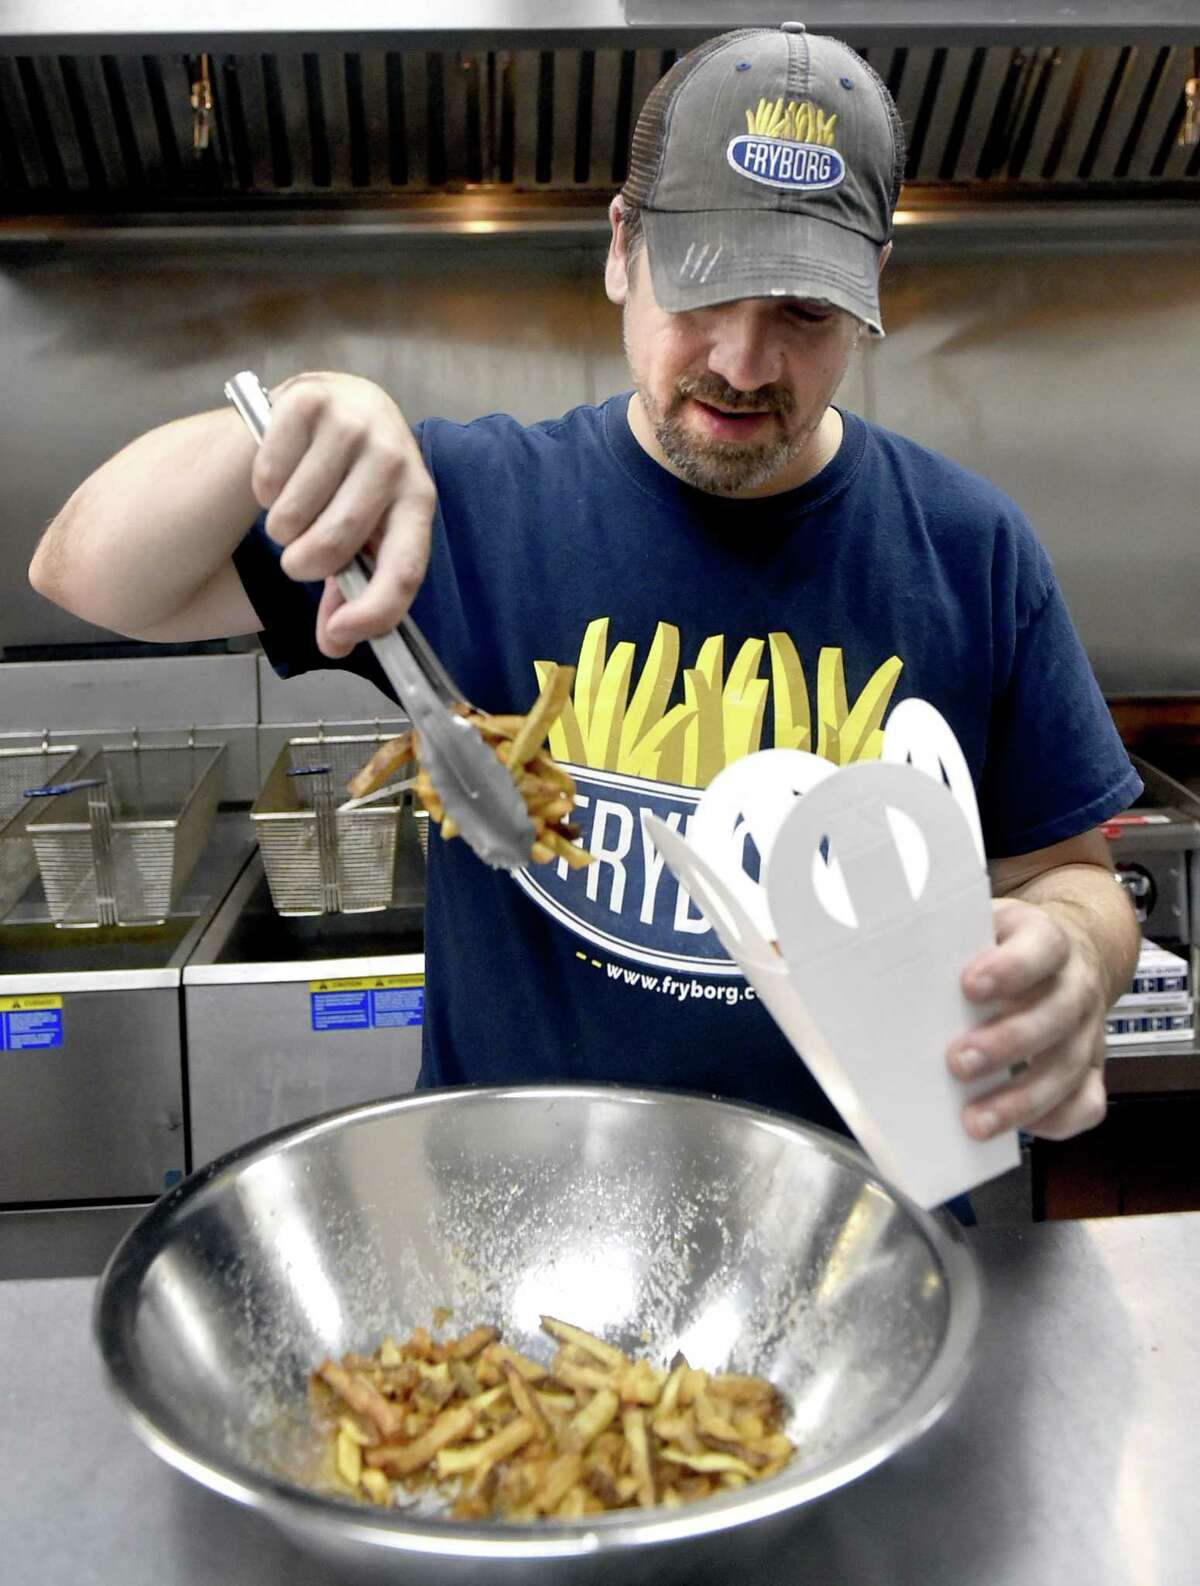 Jonathan Gibbons, owner of Fryborg, an eclectic Milford eatery featuring hand-cut french fries.